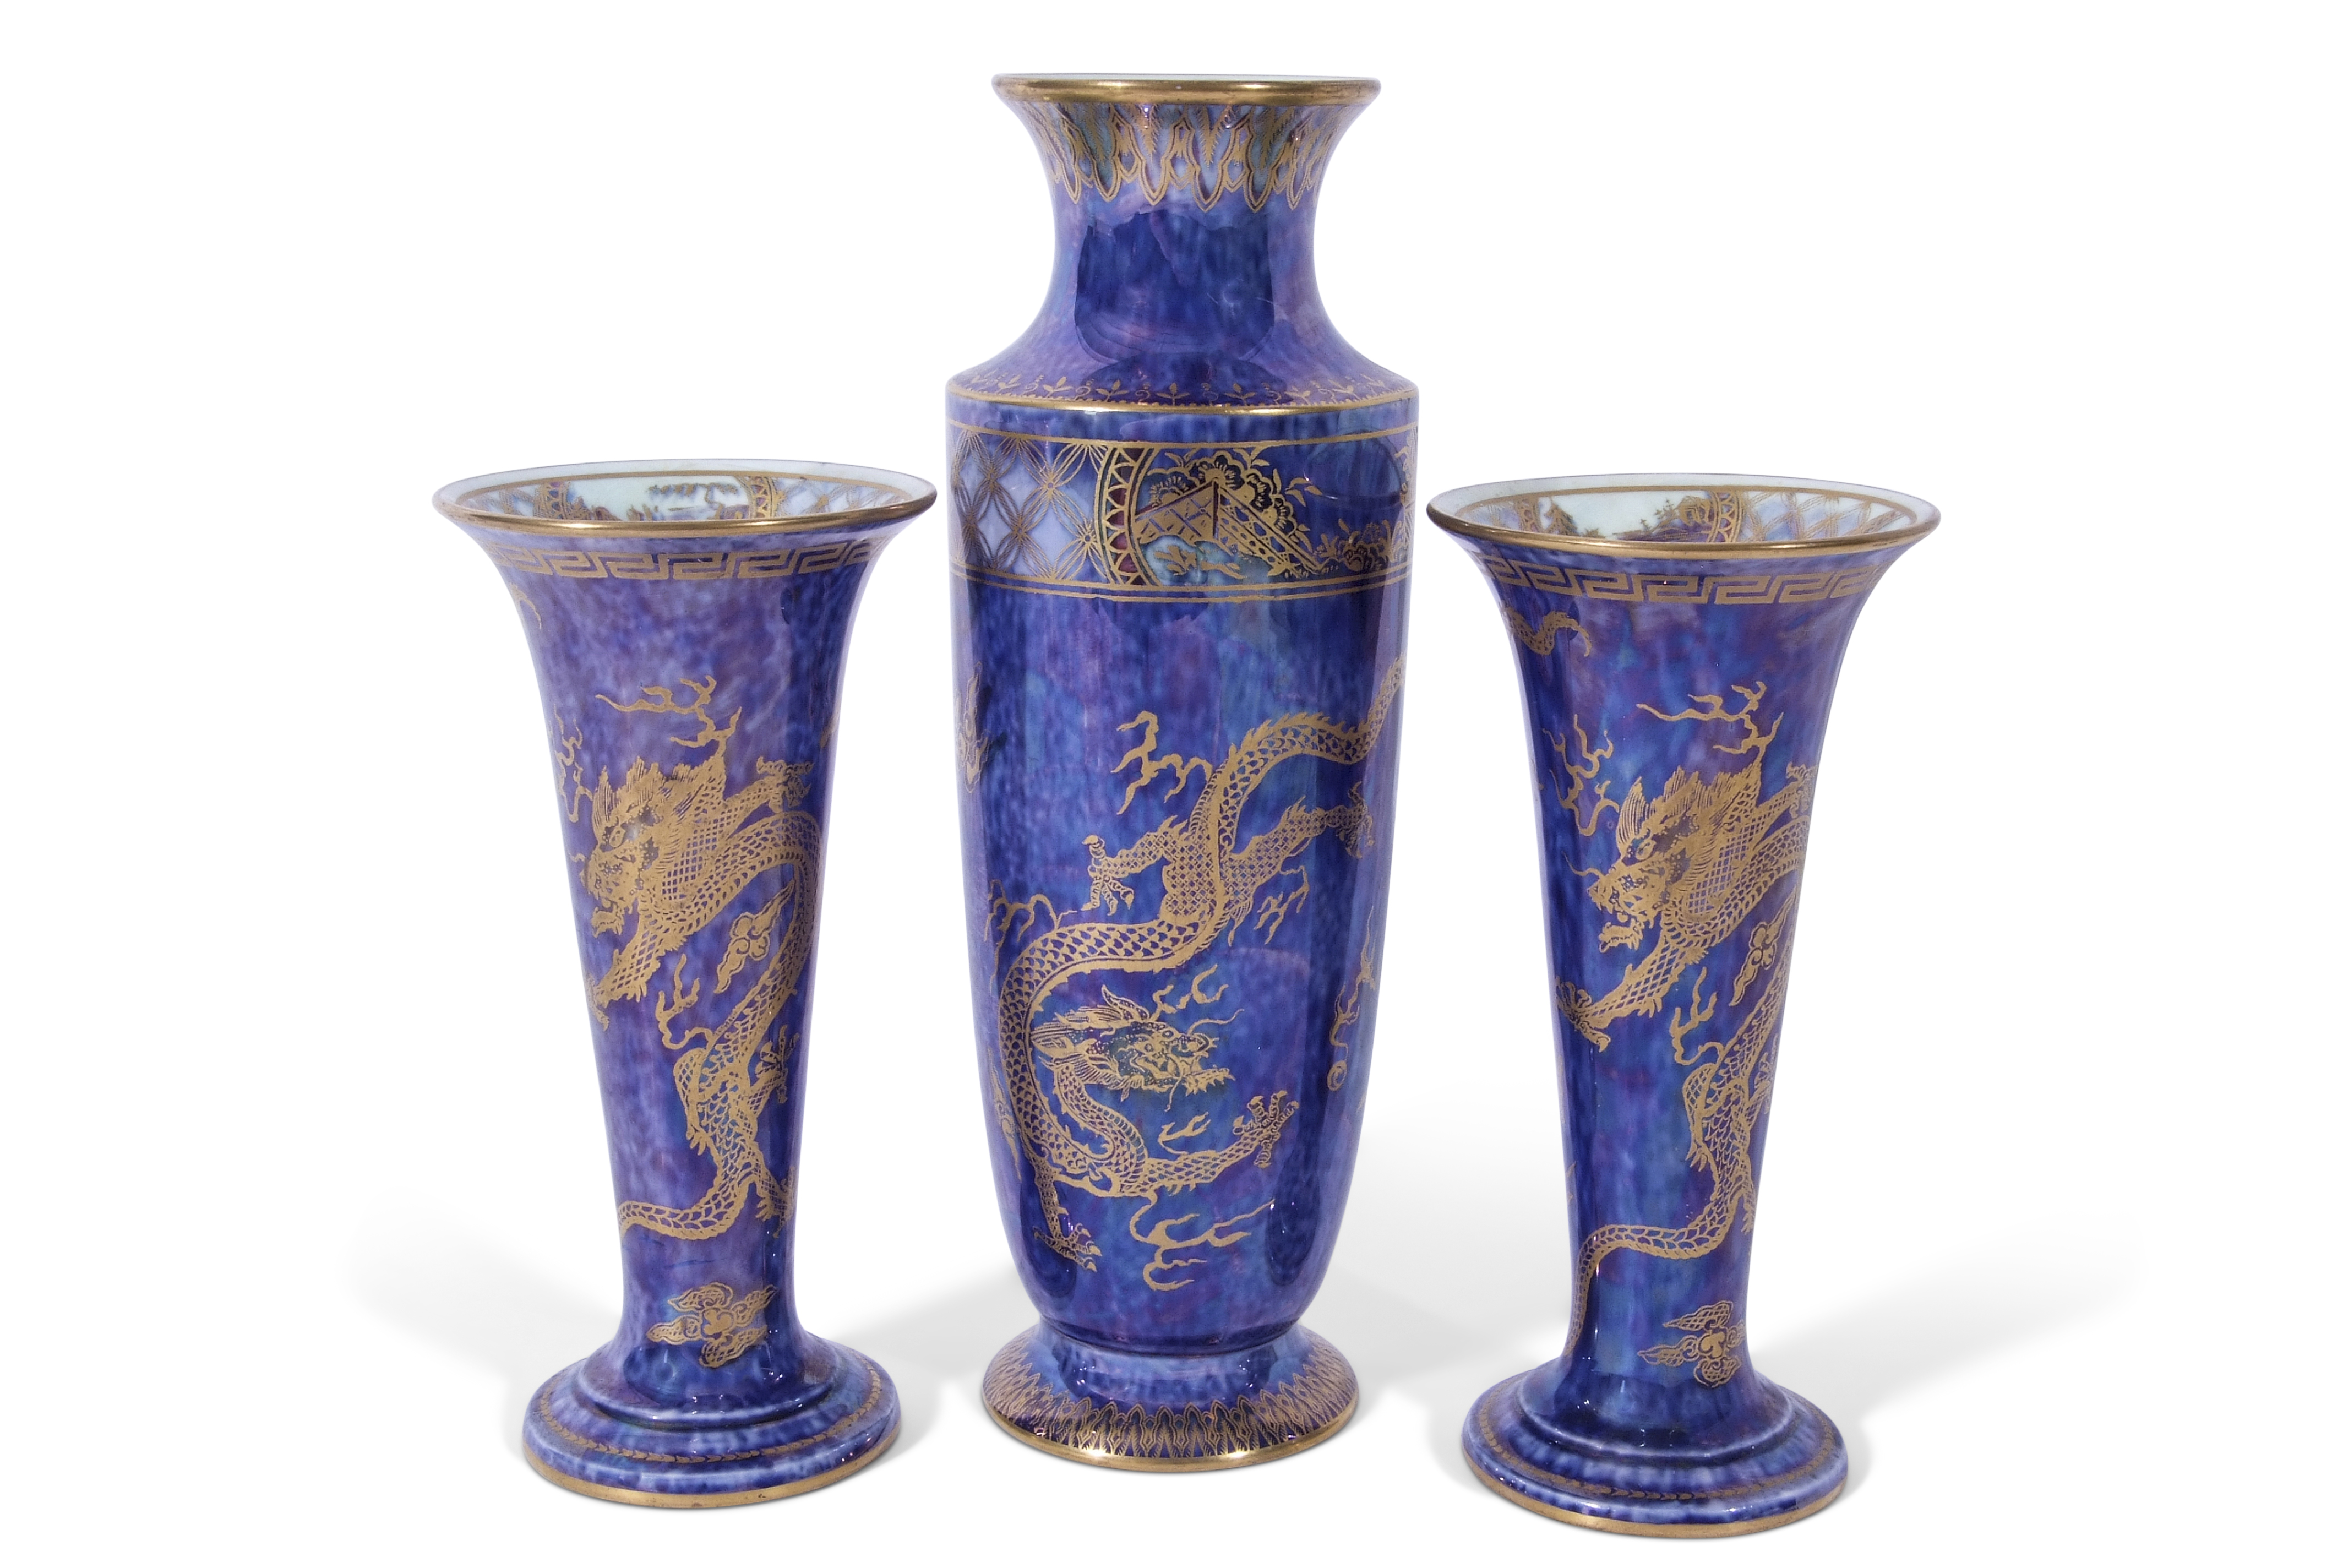 Pair of Wedgwood lustre vases the mottled blue ground decorated with gilt dragons, factory mark to